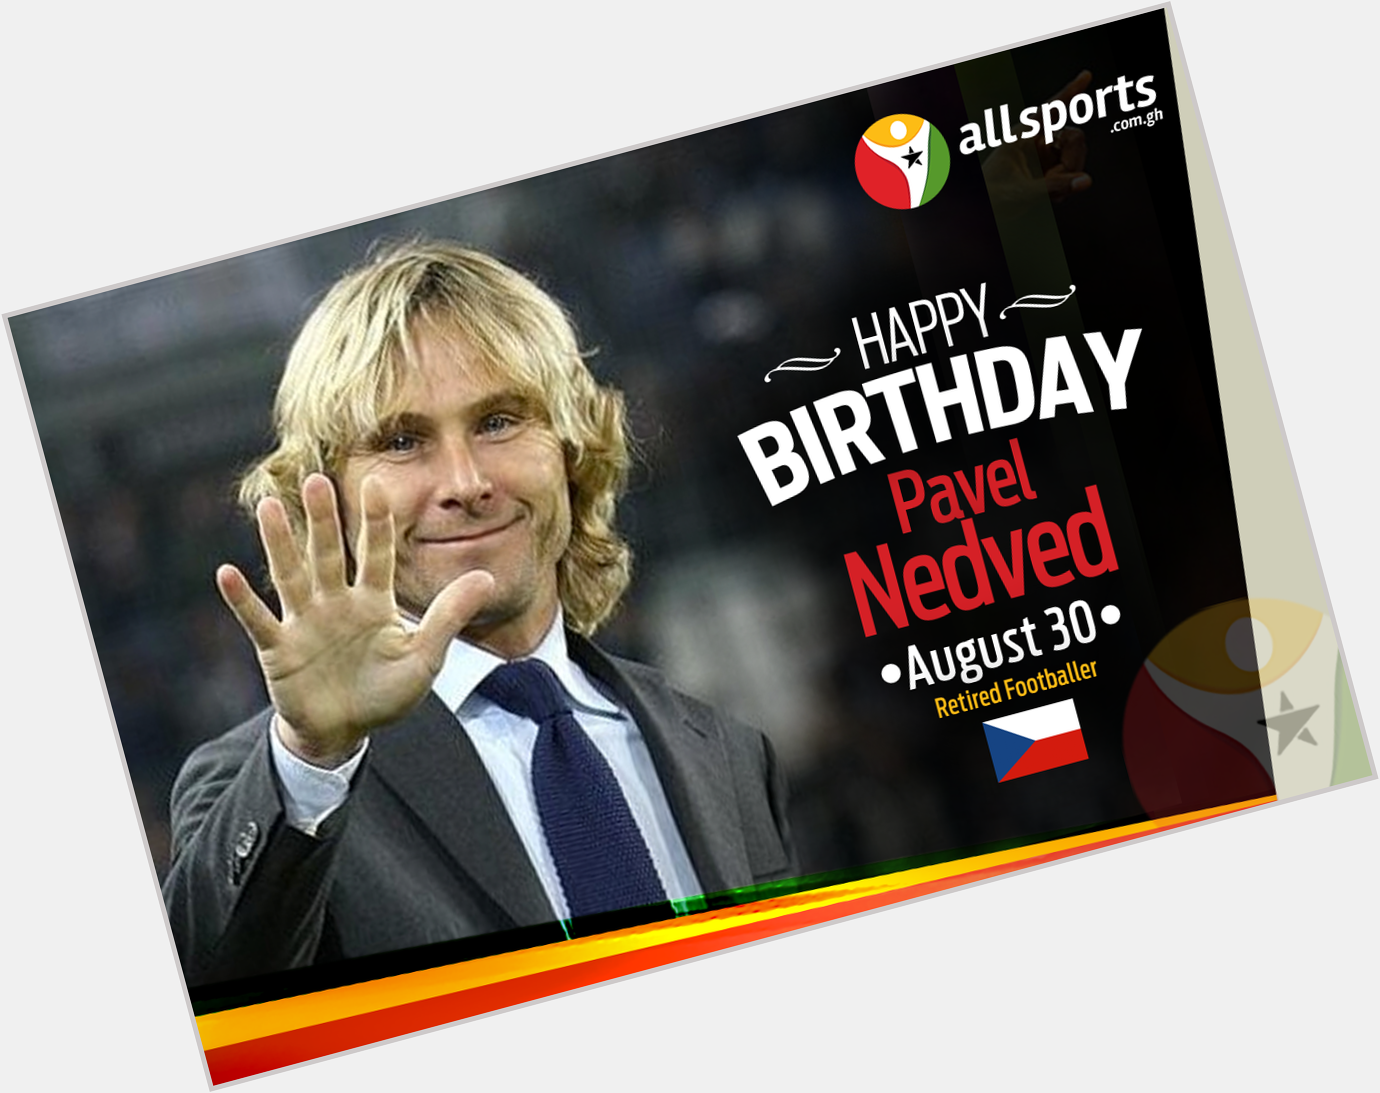 AllSportsGh wishes former Czech Rep. and midfielder, Pavel Nedved a HAPPY BIRTHDAY as he turns 43 today. 